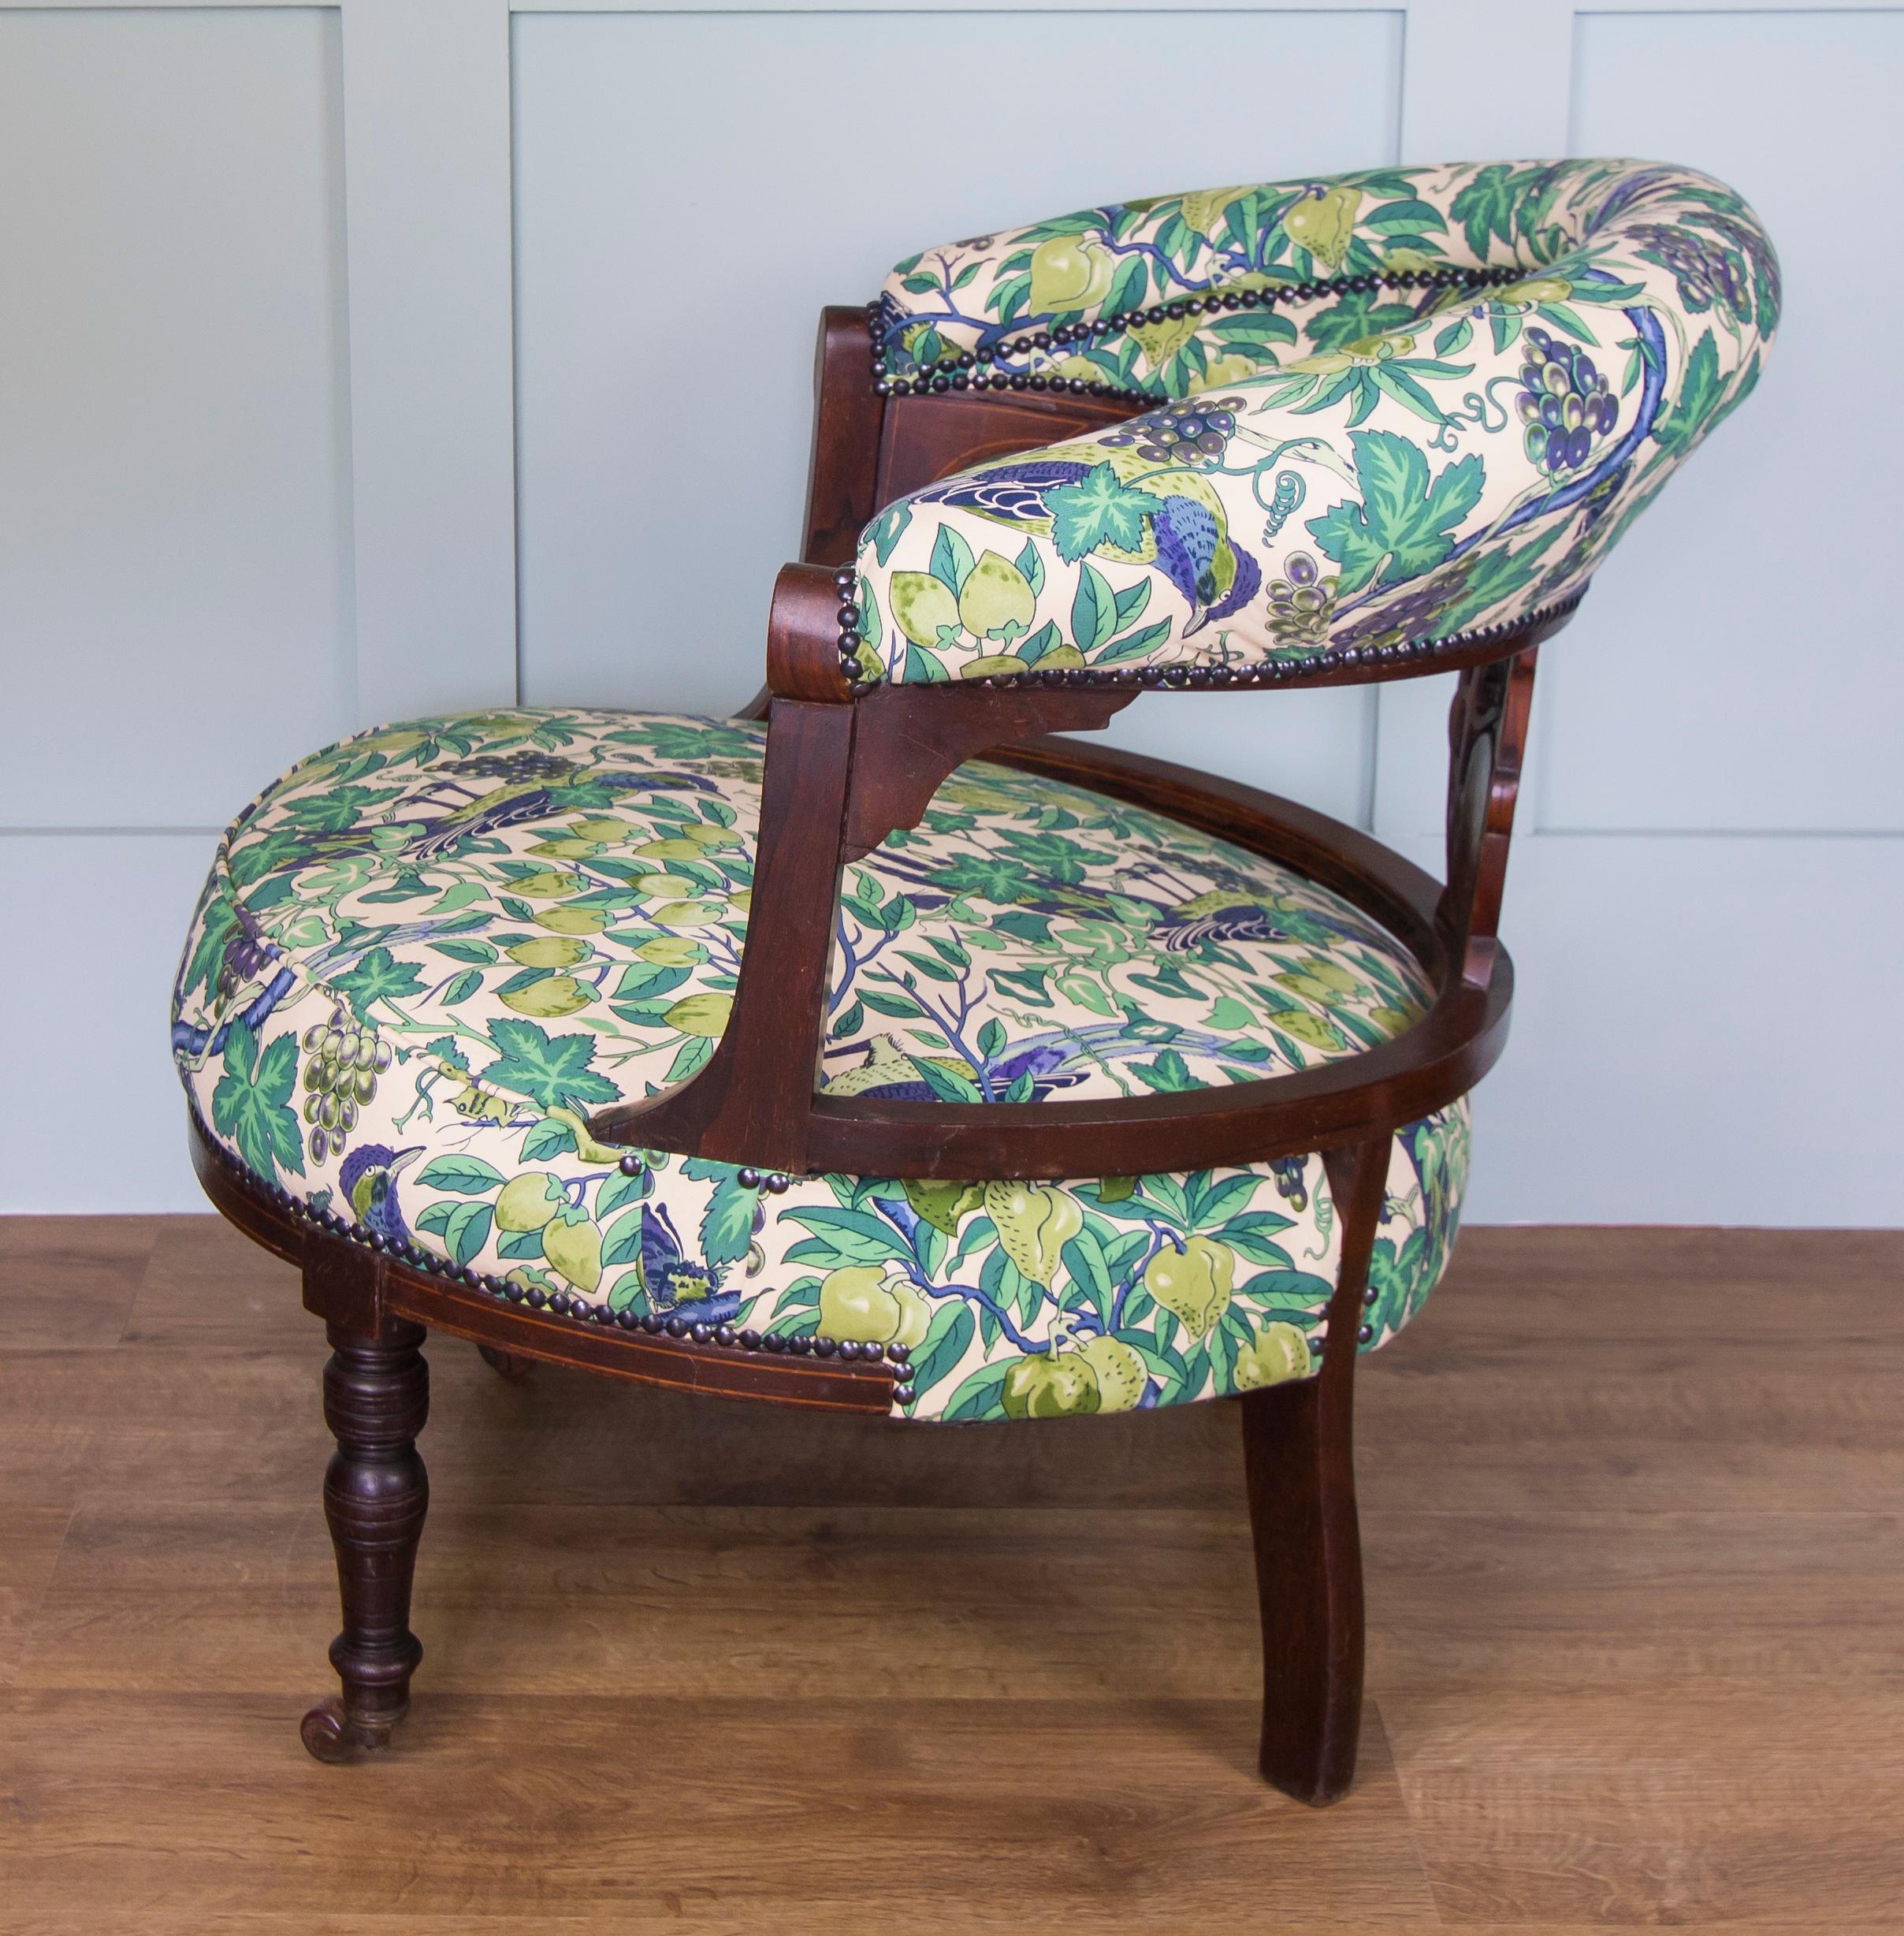 Edwardian Rosewood Marquetry Inlaid Chair Upholstered in Vintage Liberty of London Fabric